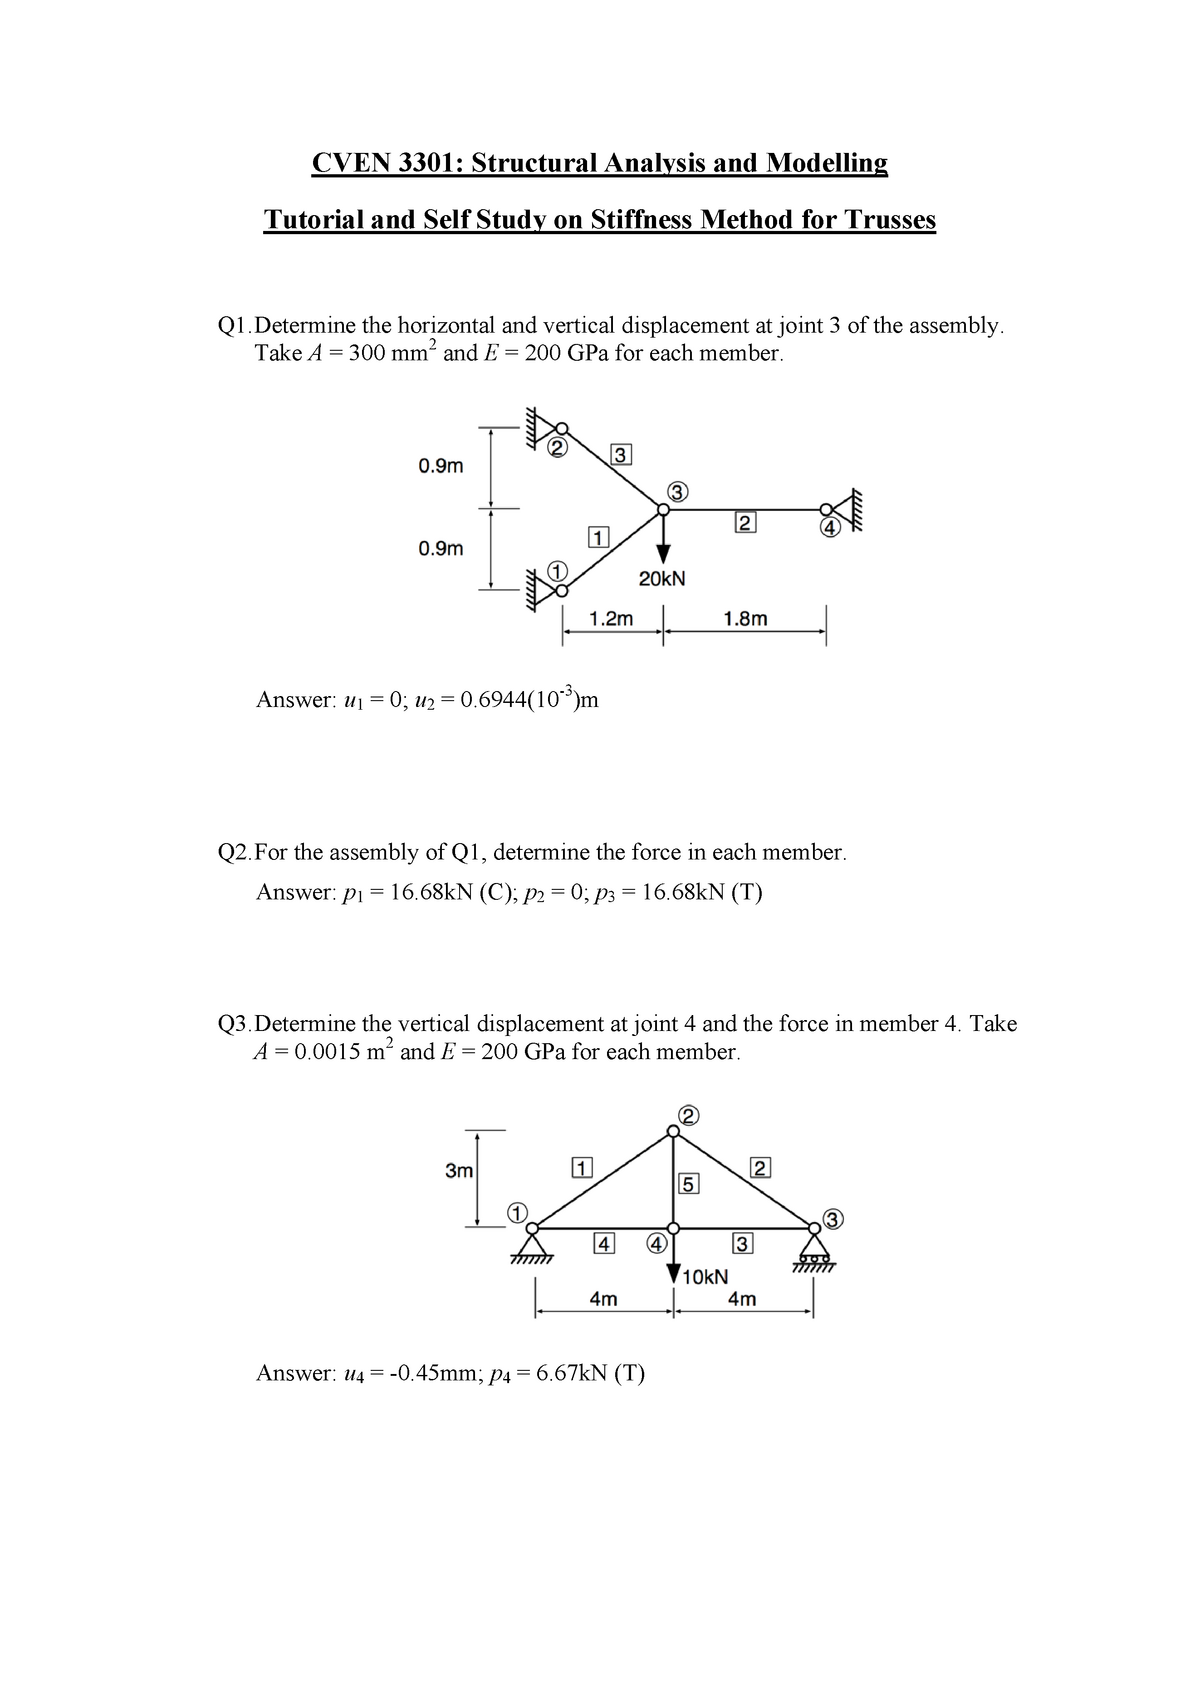 force method structural analysis examples